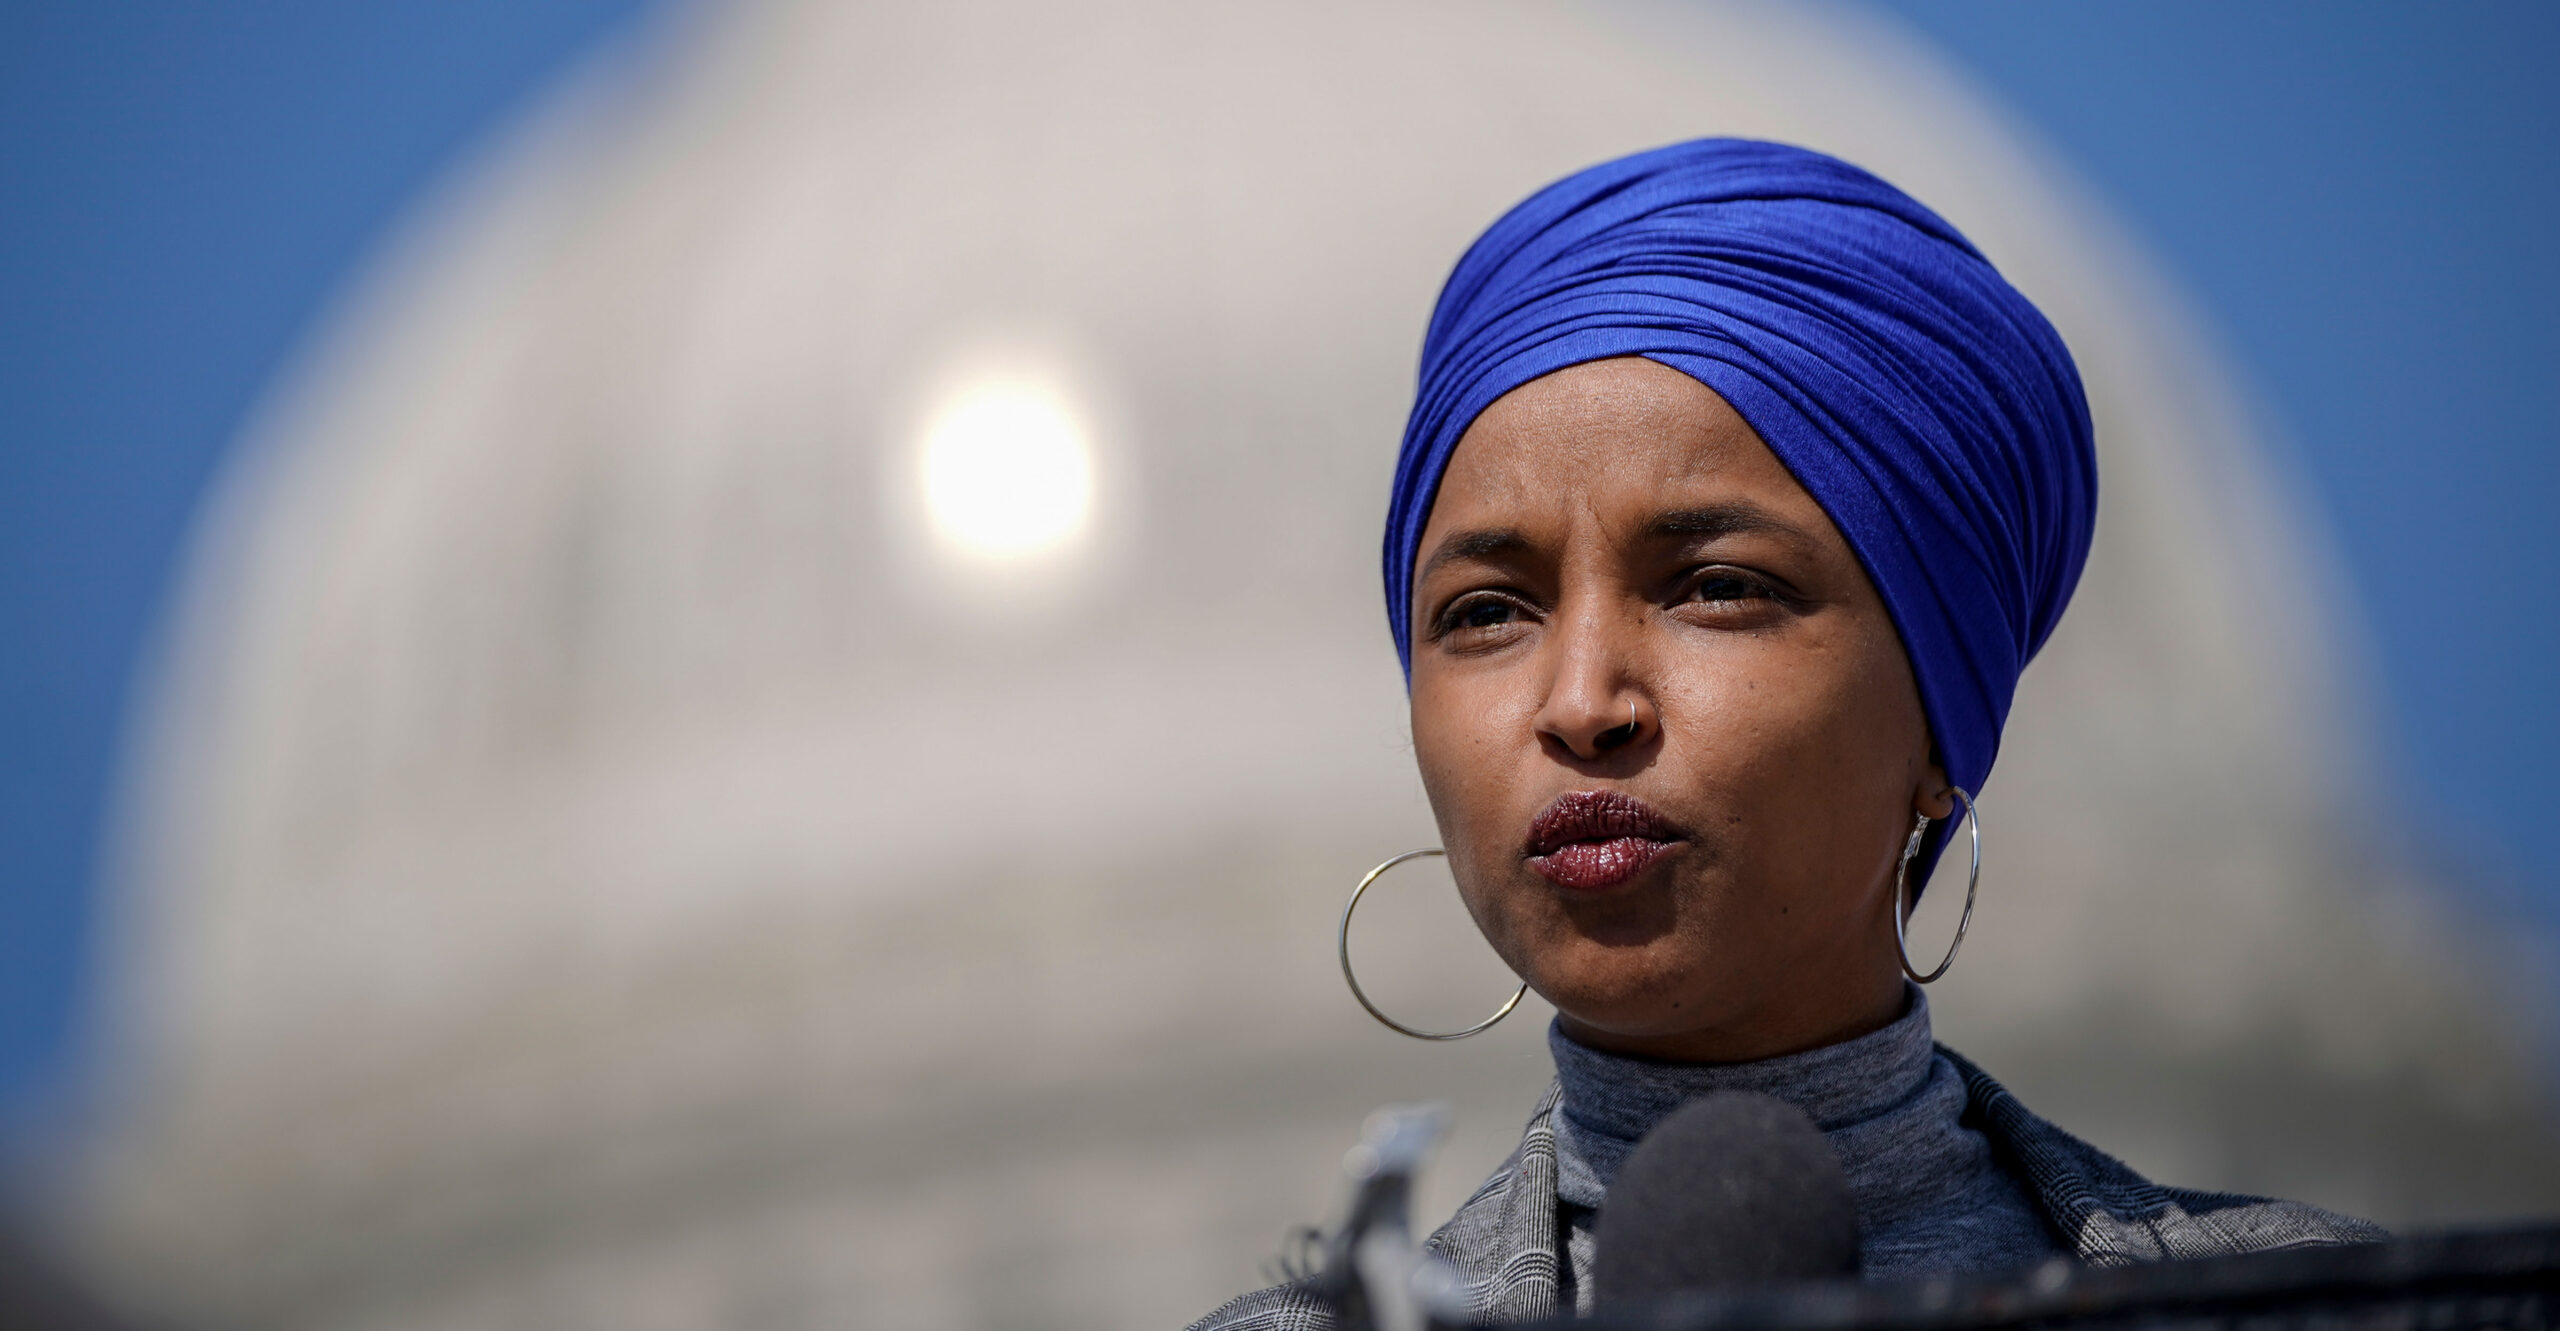 Pelosi Thanks Omar for Clarifying Statement Criticized for Equating US, Israel With Terrorist Groups